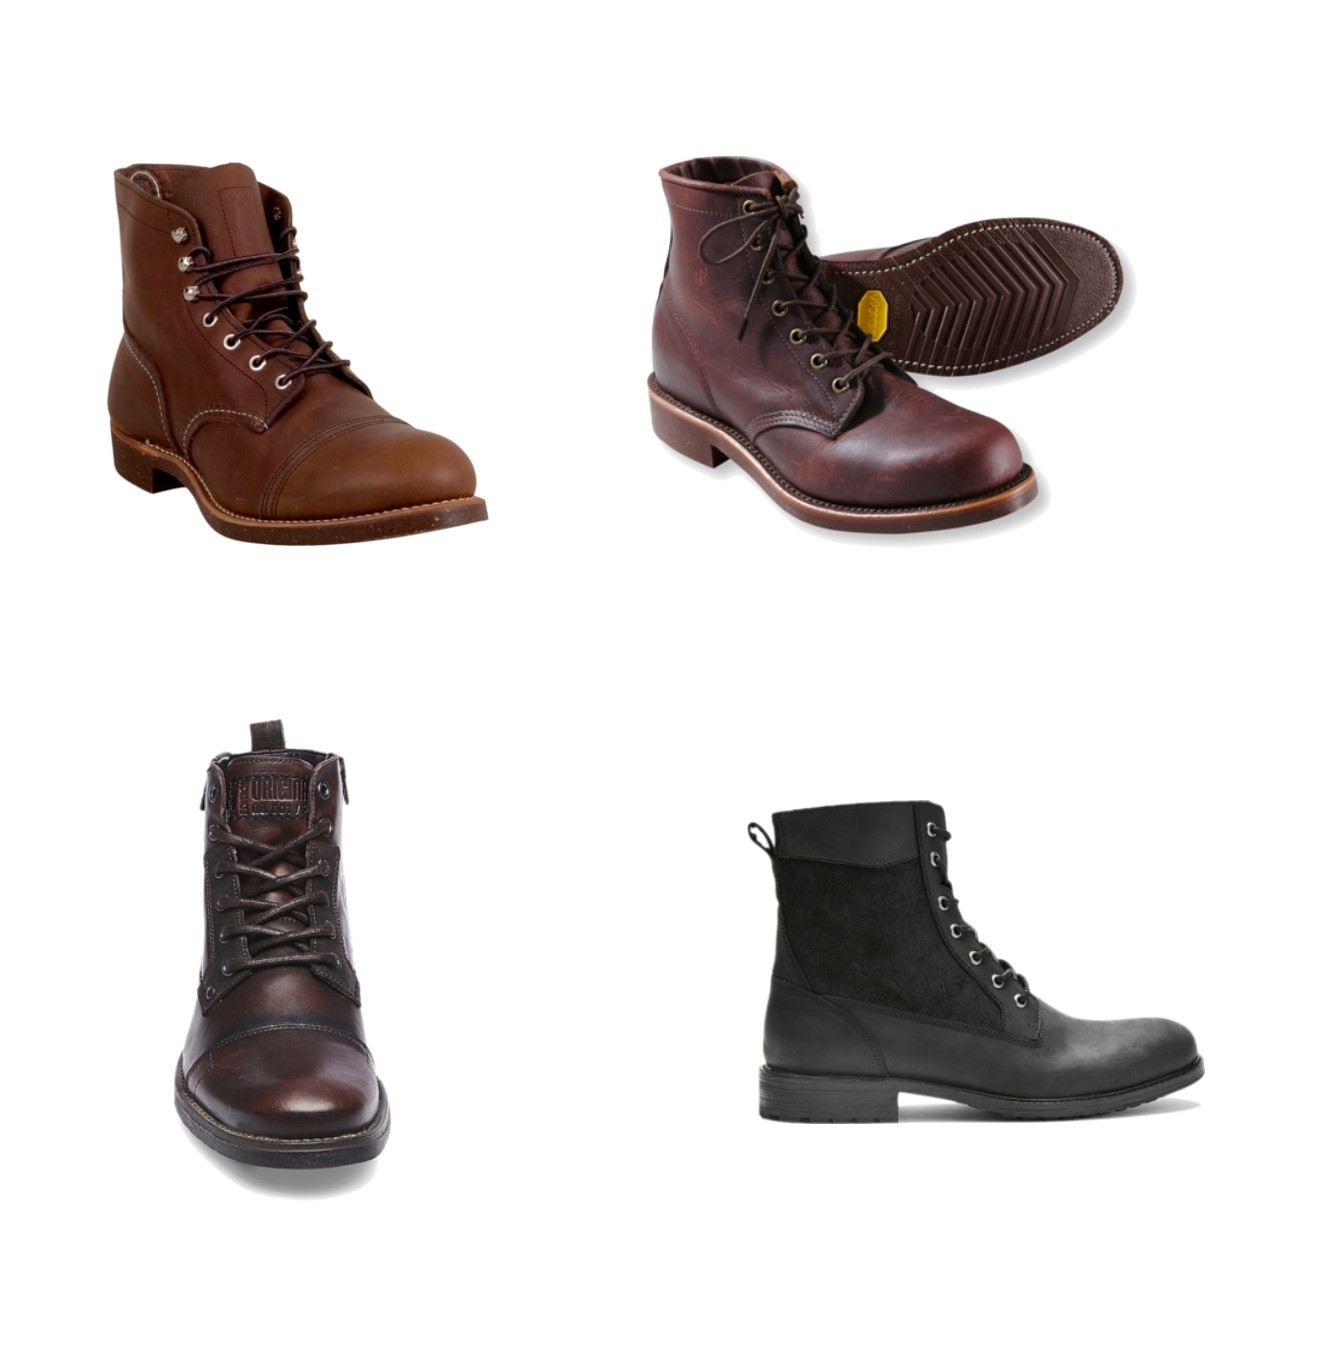 boots to wear with suits